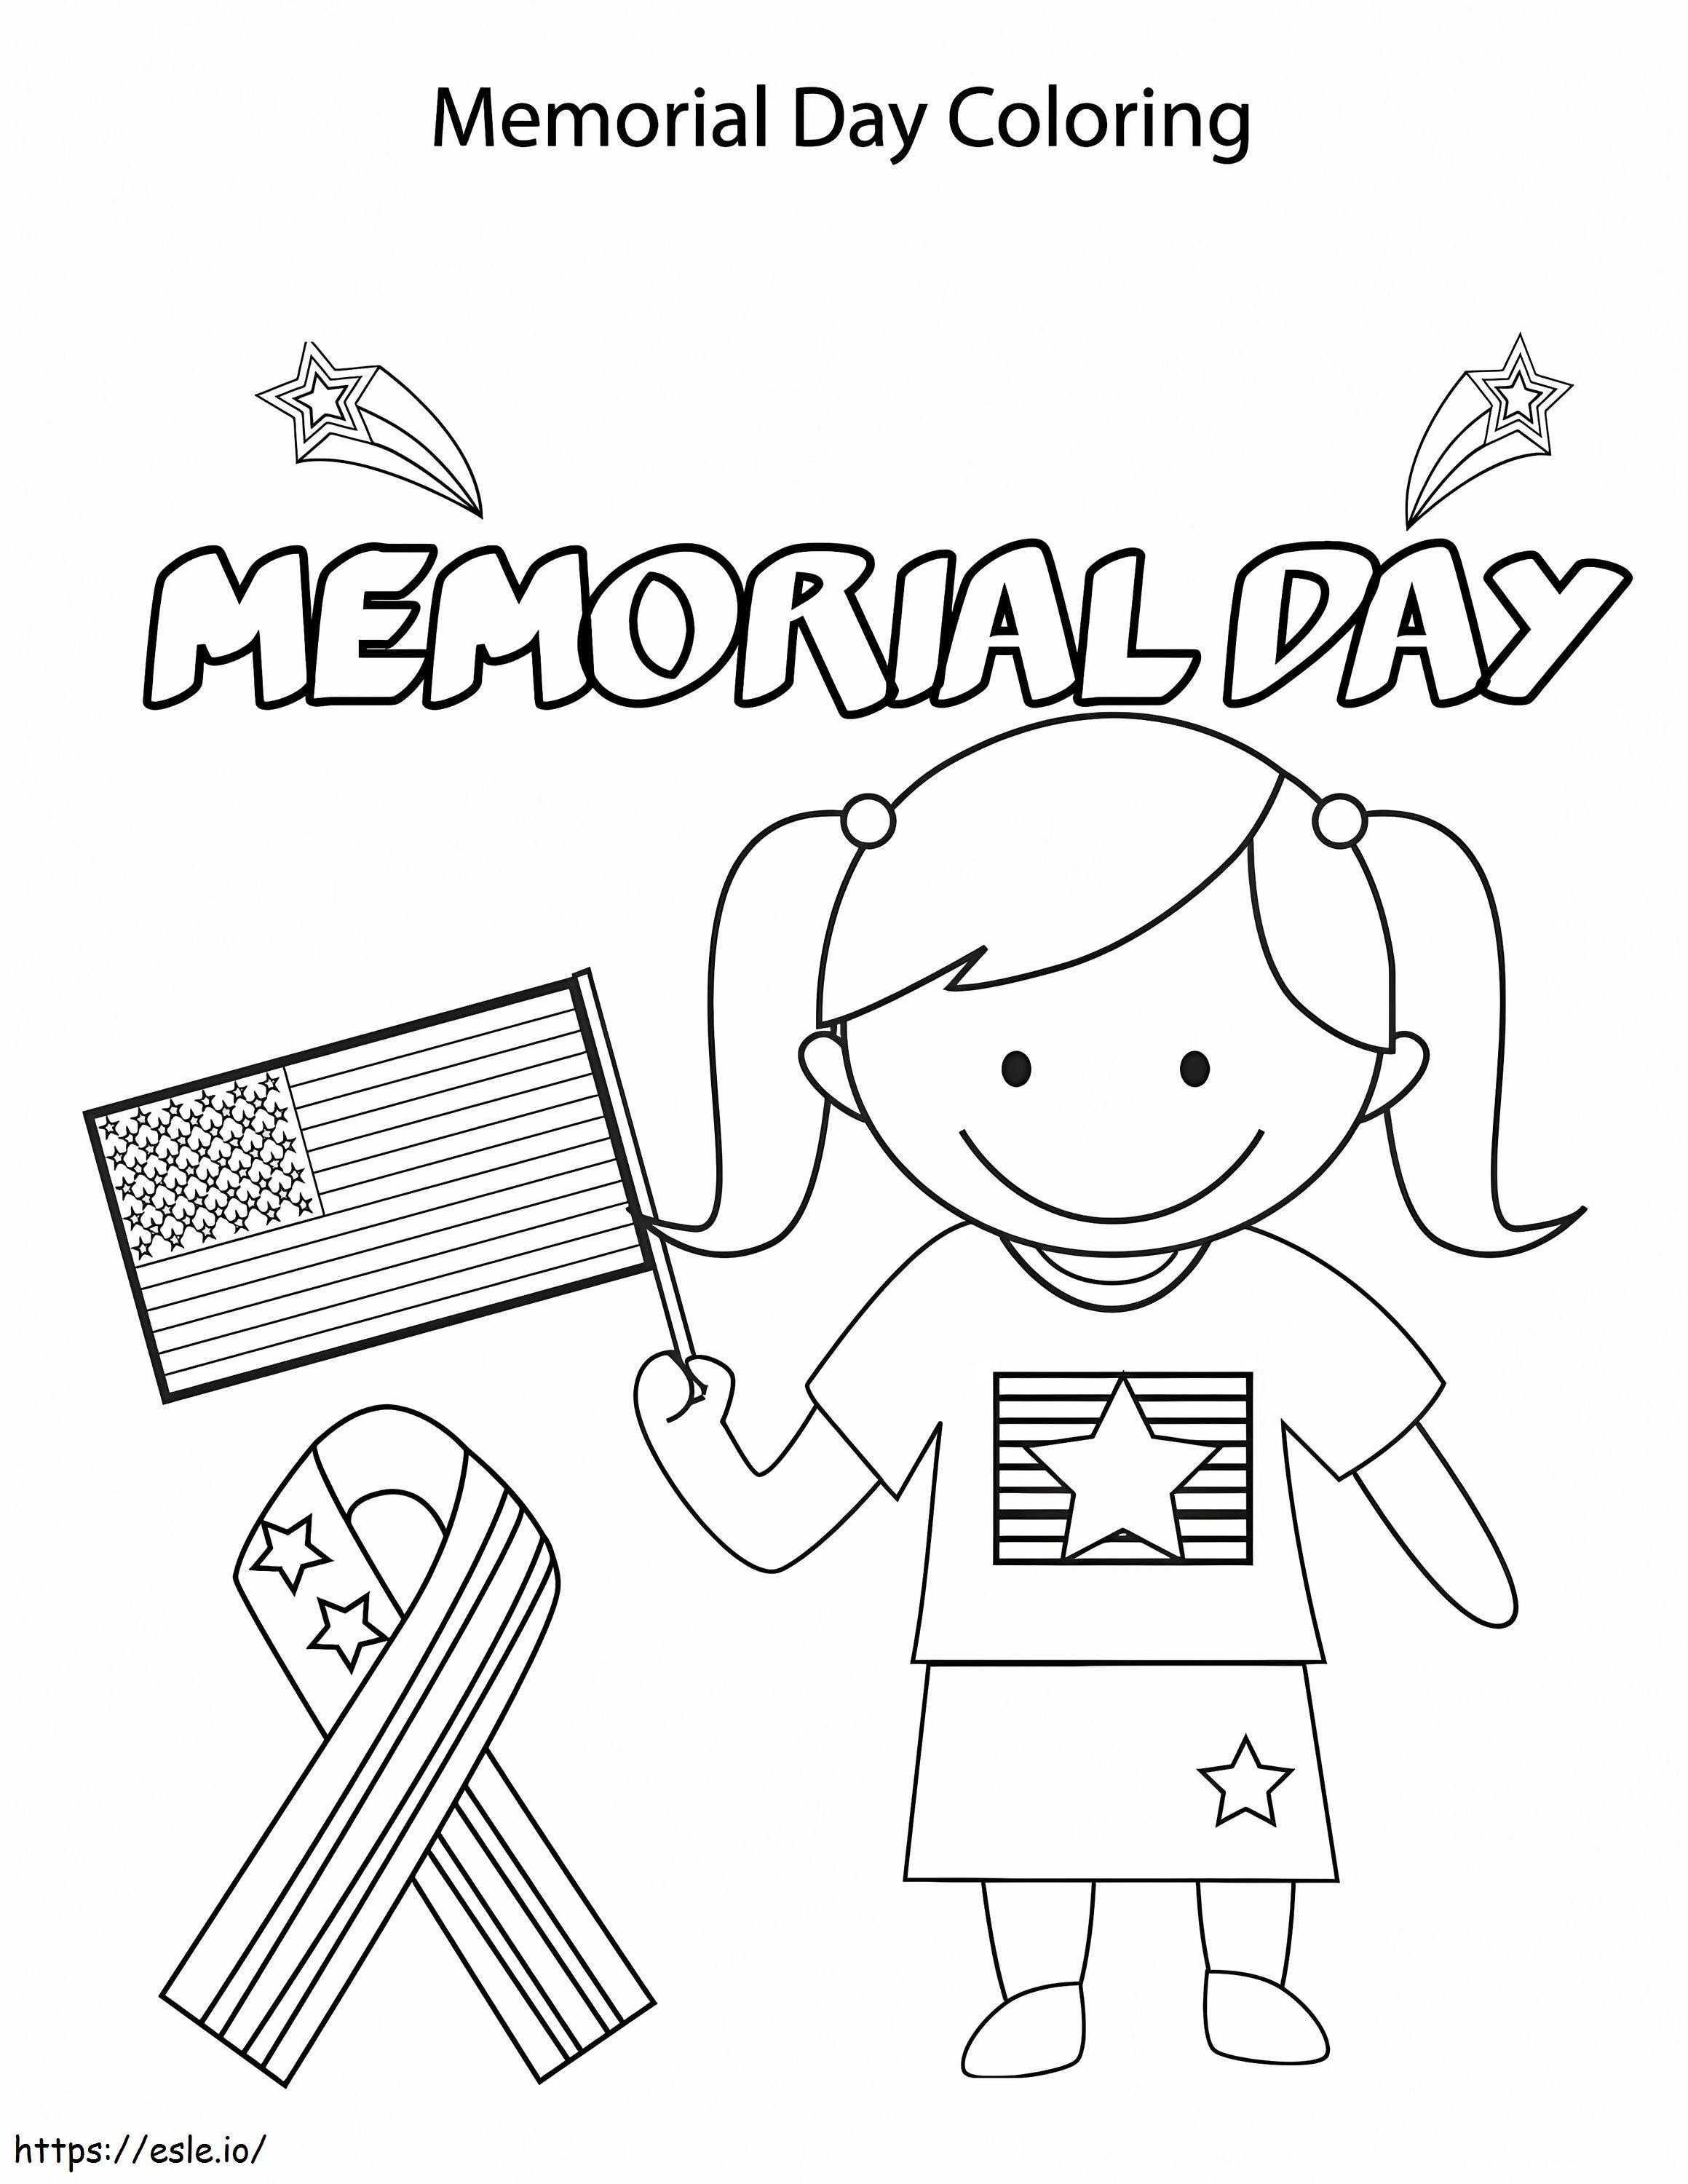 1577501581 Memorial Day 8 I Free Printable Memorial Day coloring page